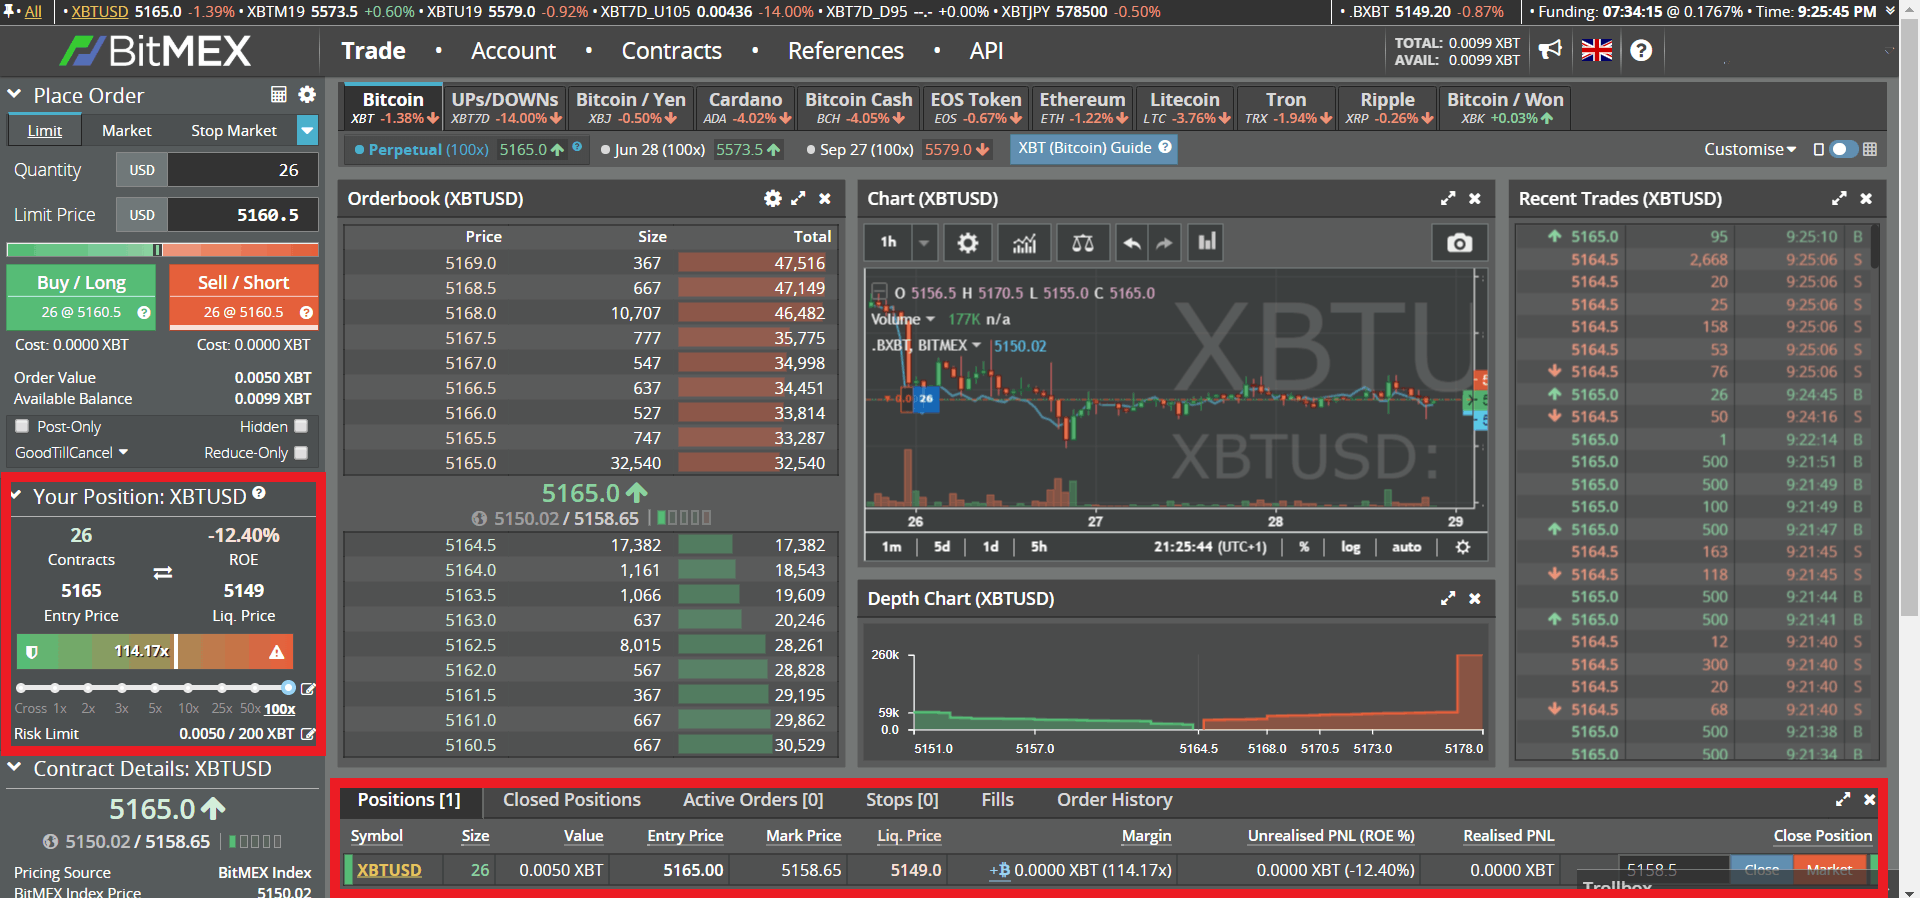 Tracking Profit and Loss on BitMEX